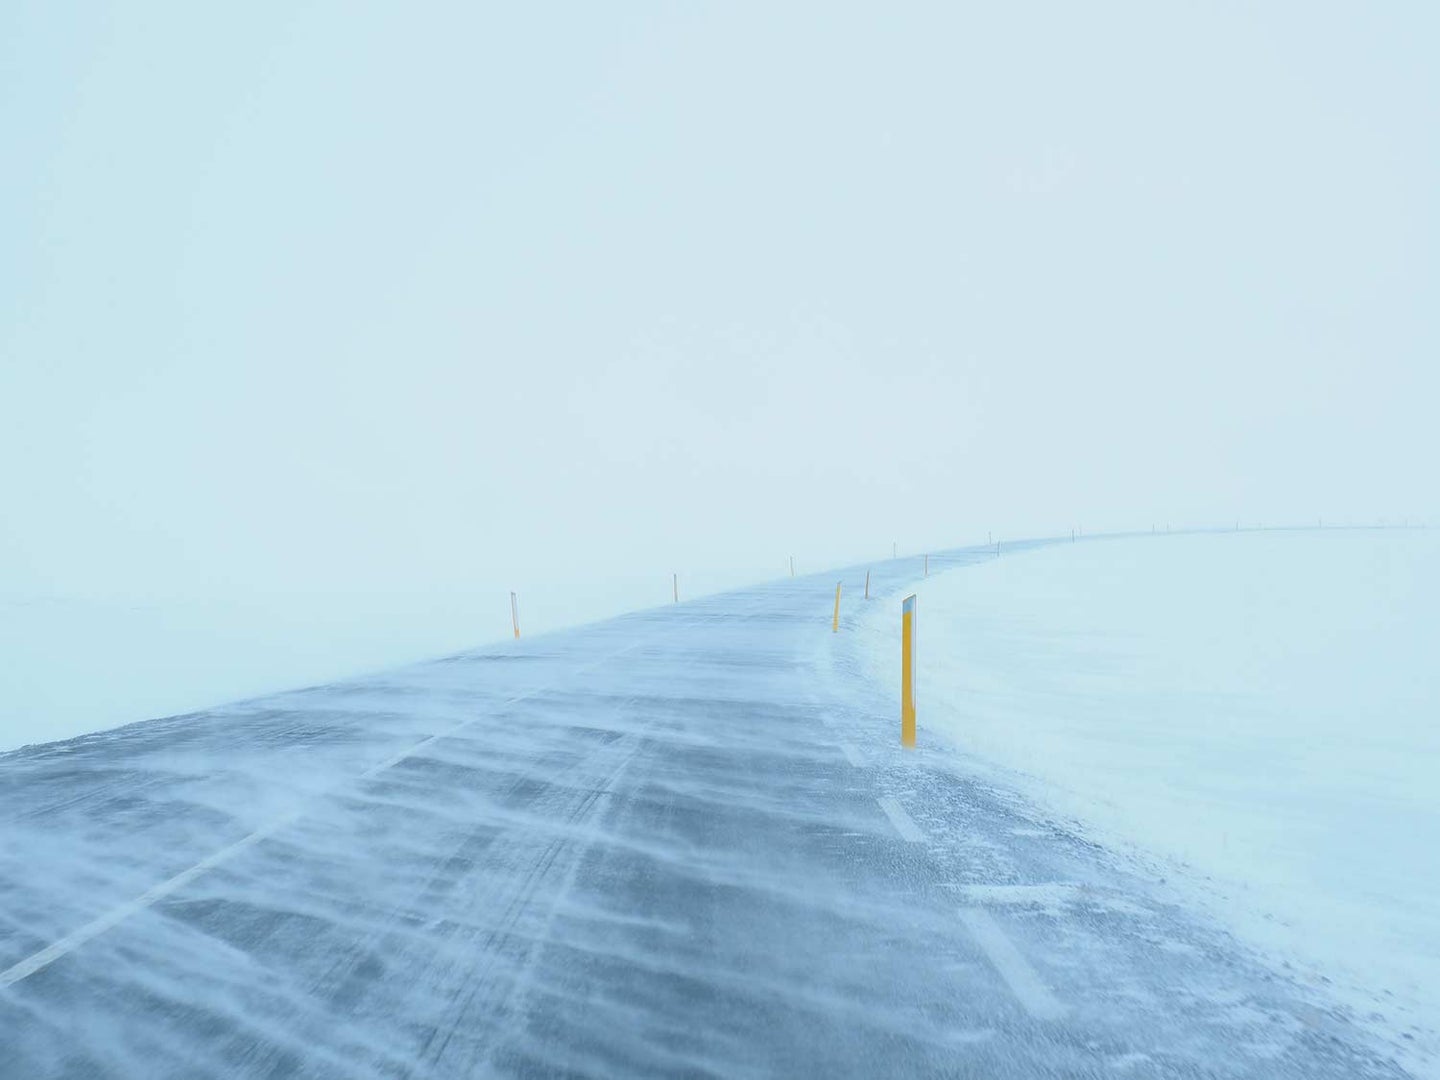 An image of a road covered in snow during a blizzard.